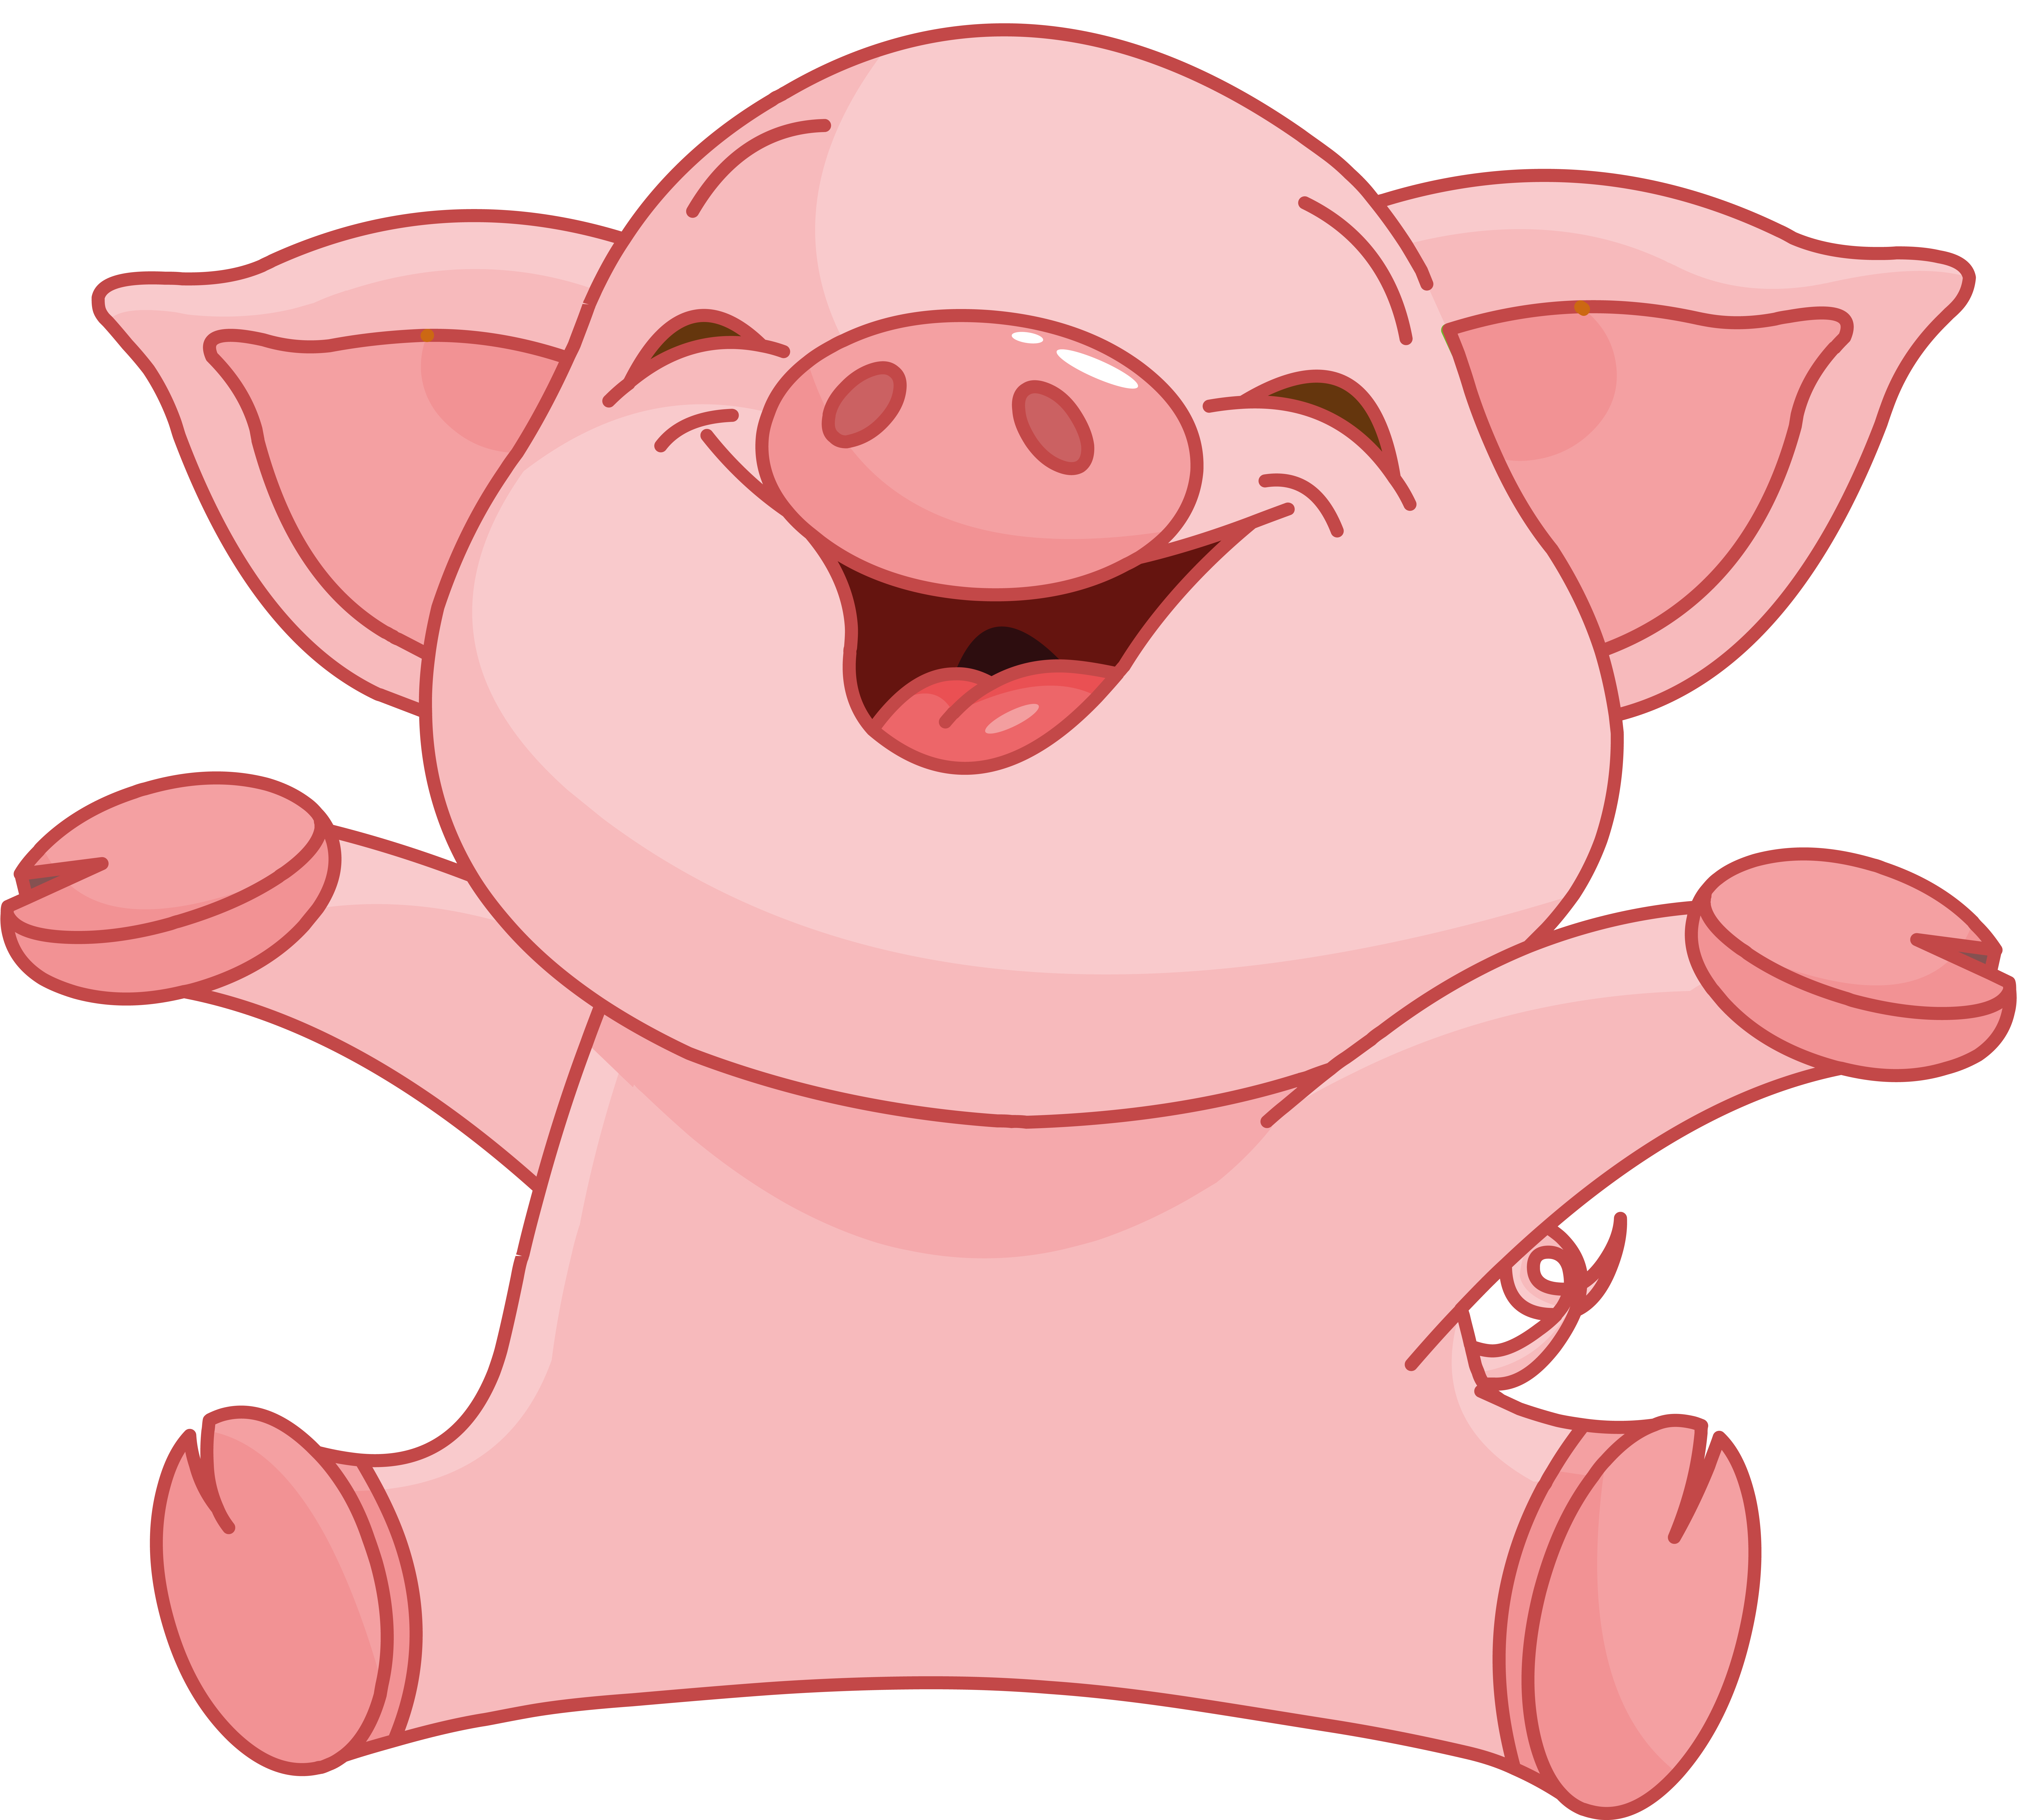 Royalty-Free Domestic Cartoon Pig Free Clipart HQ Clipart